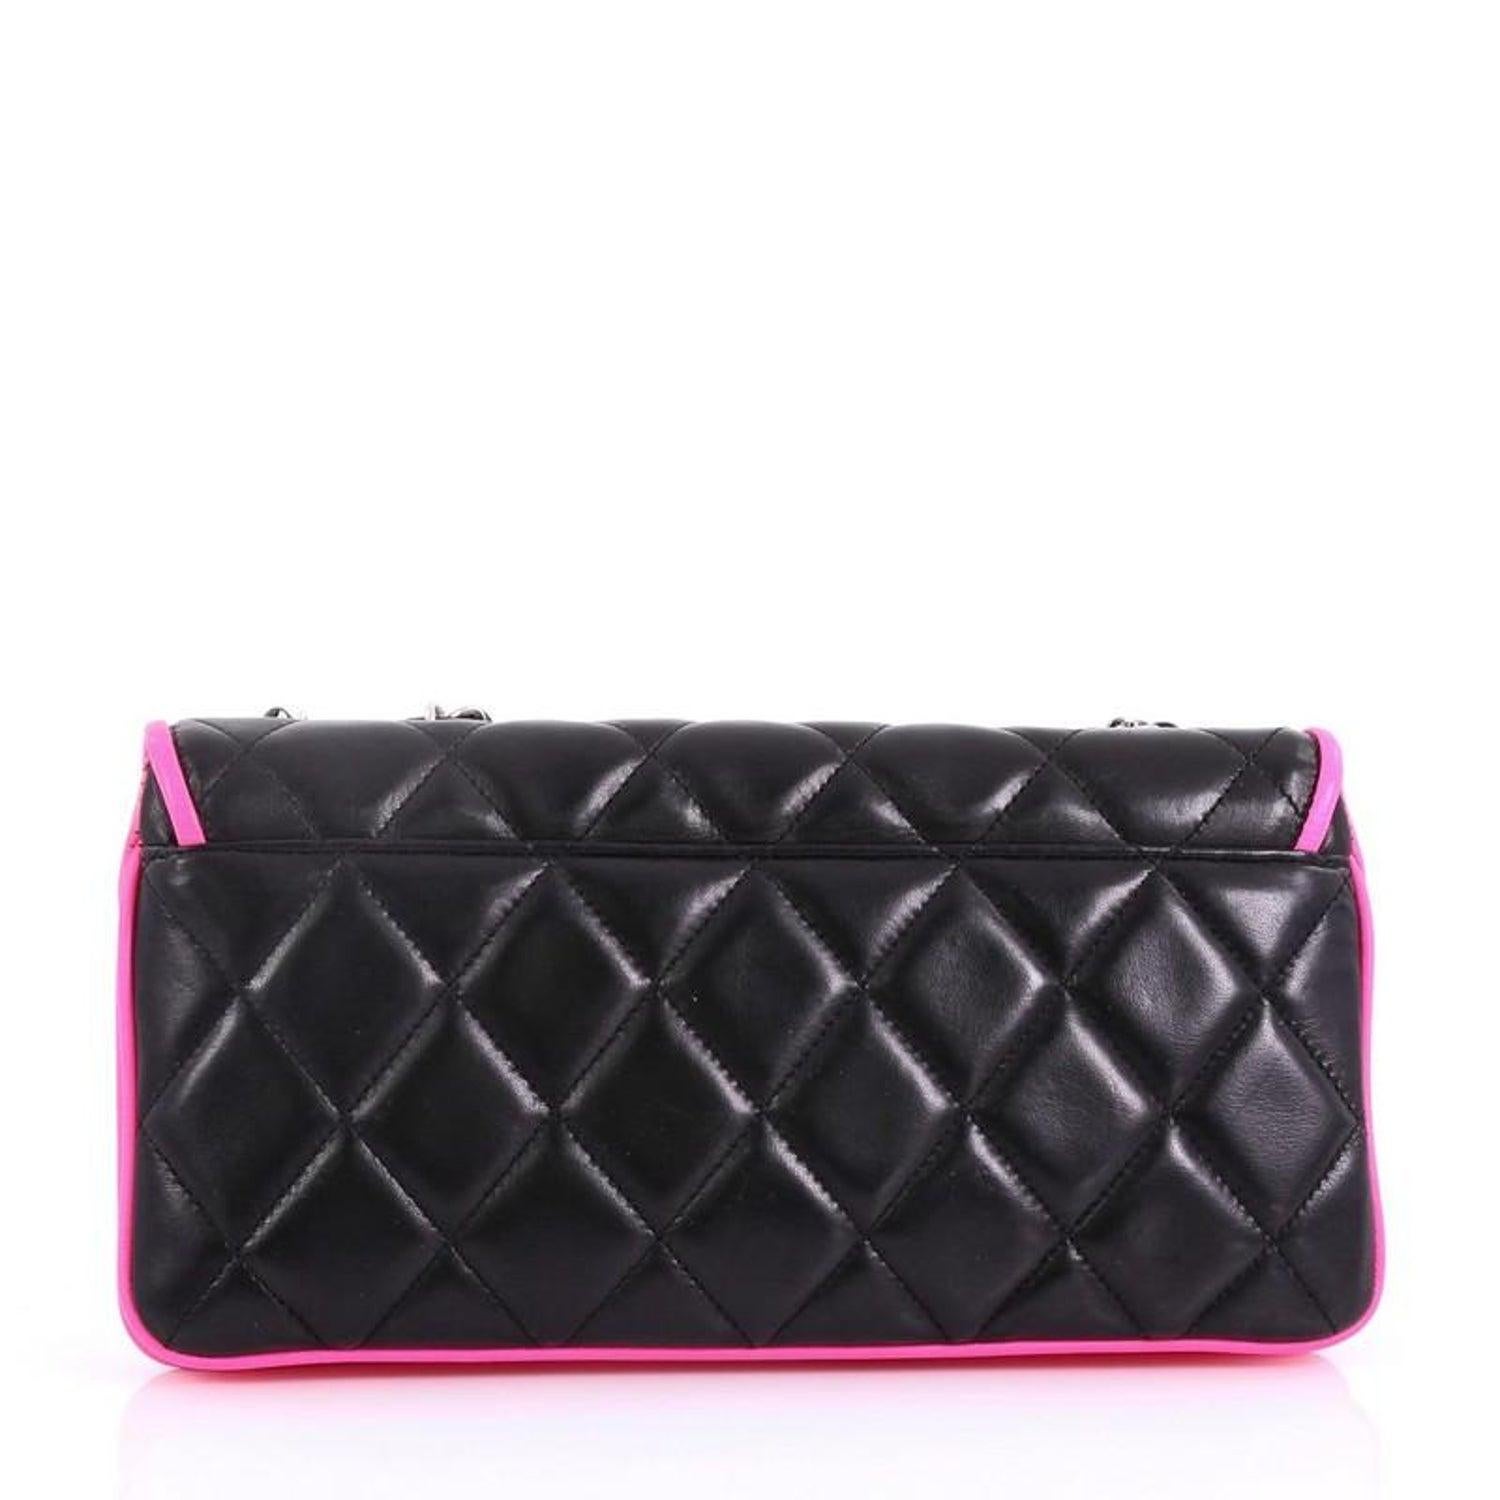 Chanel 2008 Cruise Black Pink Small Medium Logo Accordion Classic Flap Bag  For Sale 3